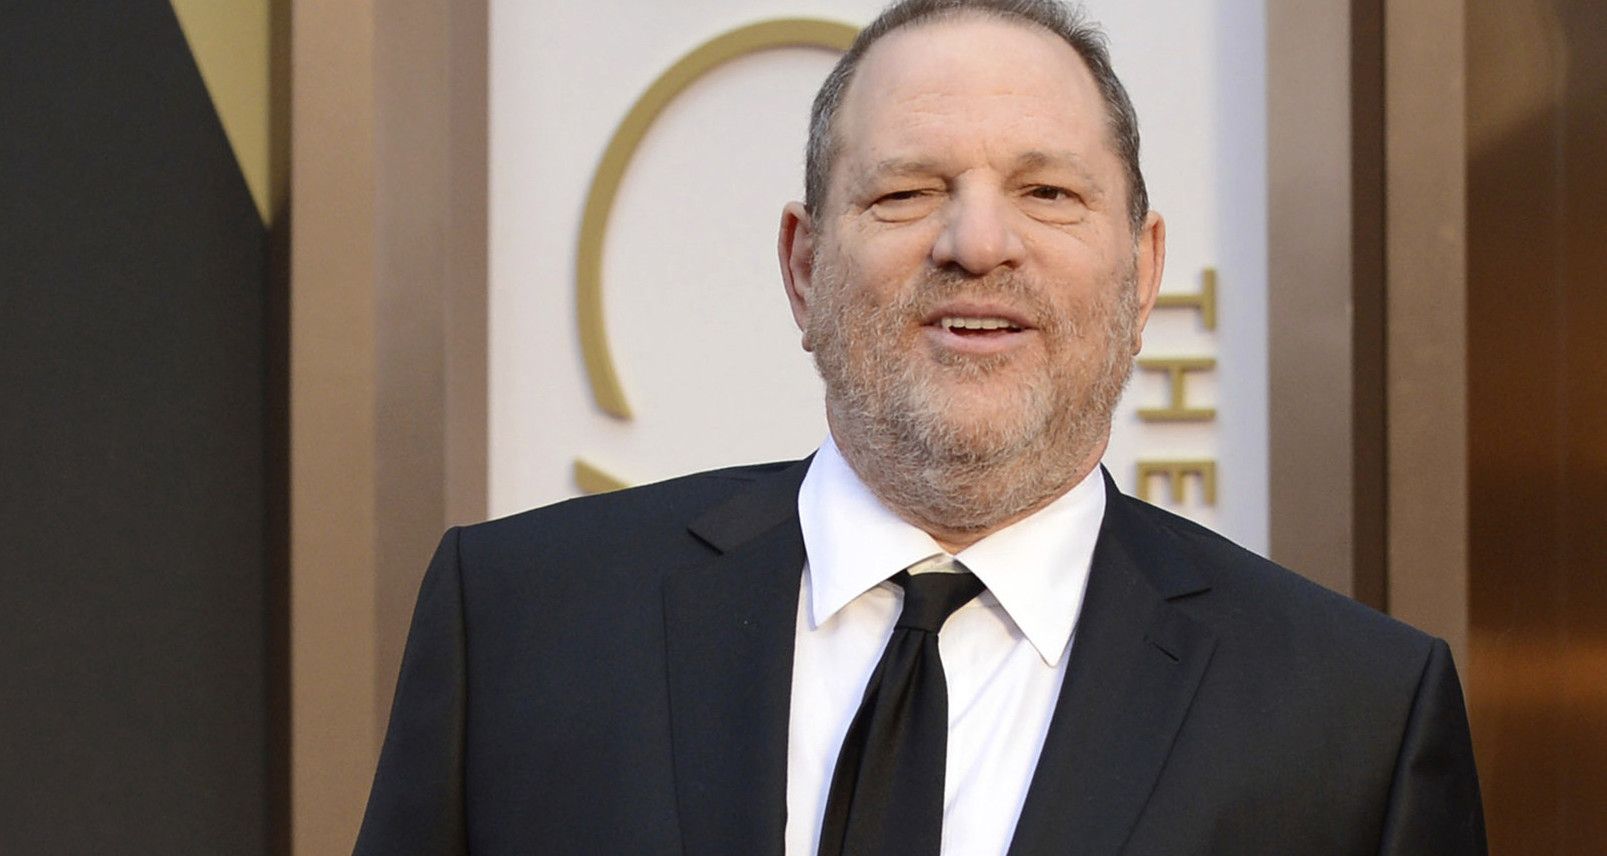 New Survey Says 94% of Women in Hollywood Have Experienced Sexual Misconduct